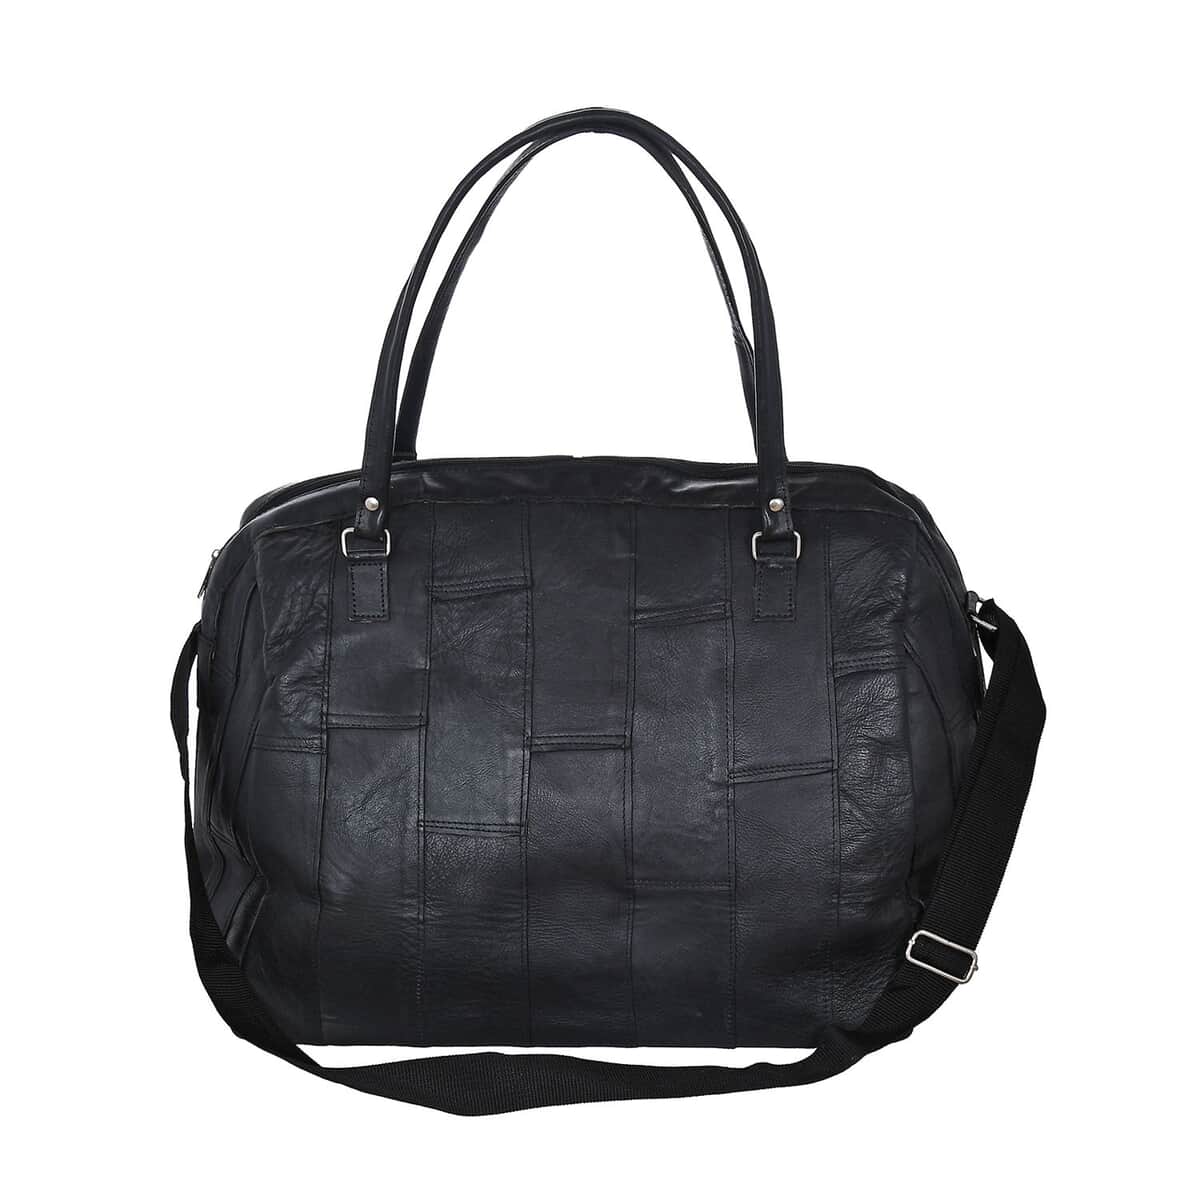 Buy Closeout Deal Black Genuine Cow Leather Duffle Bag (18x10x14) at ...